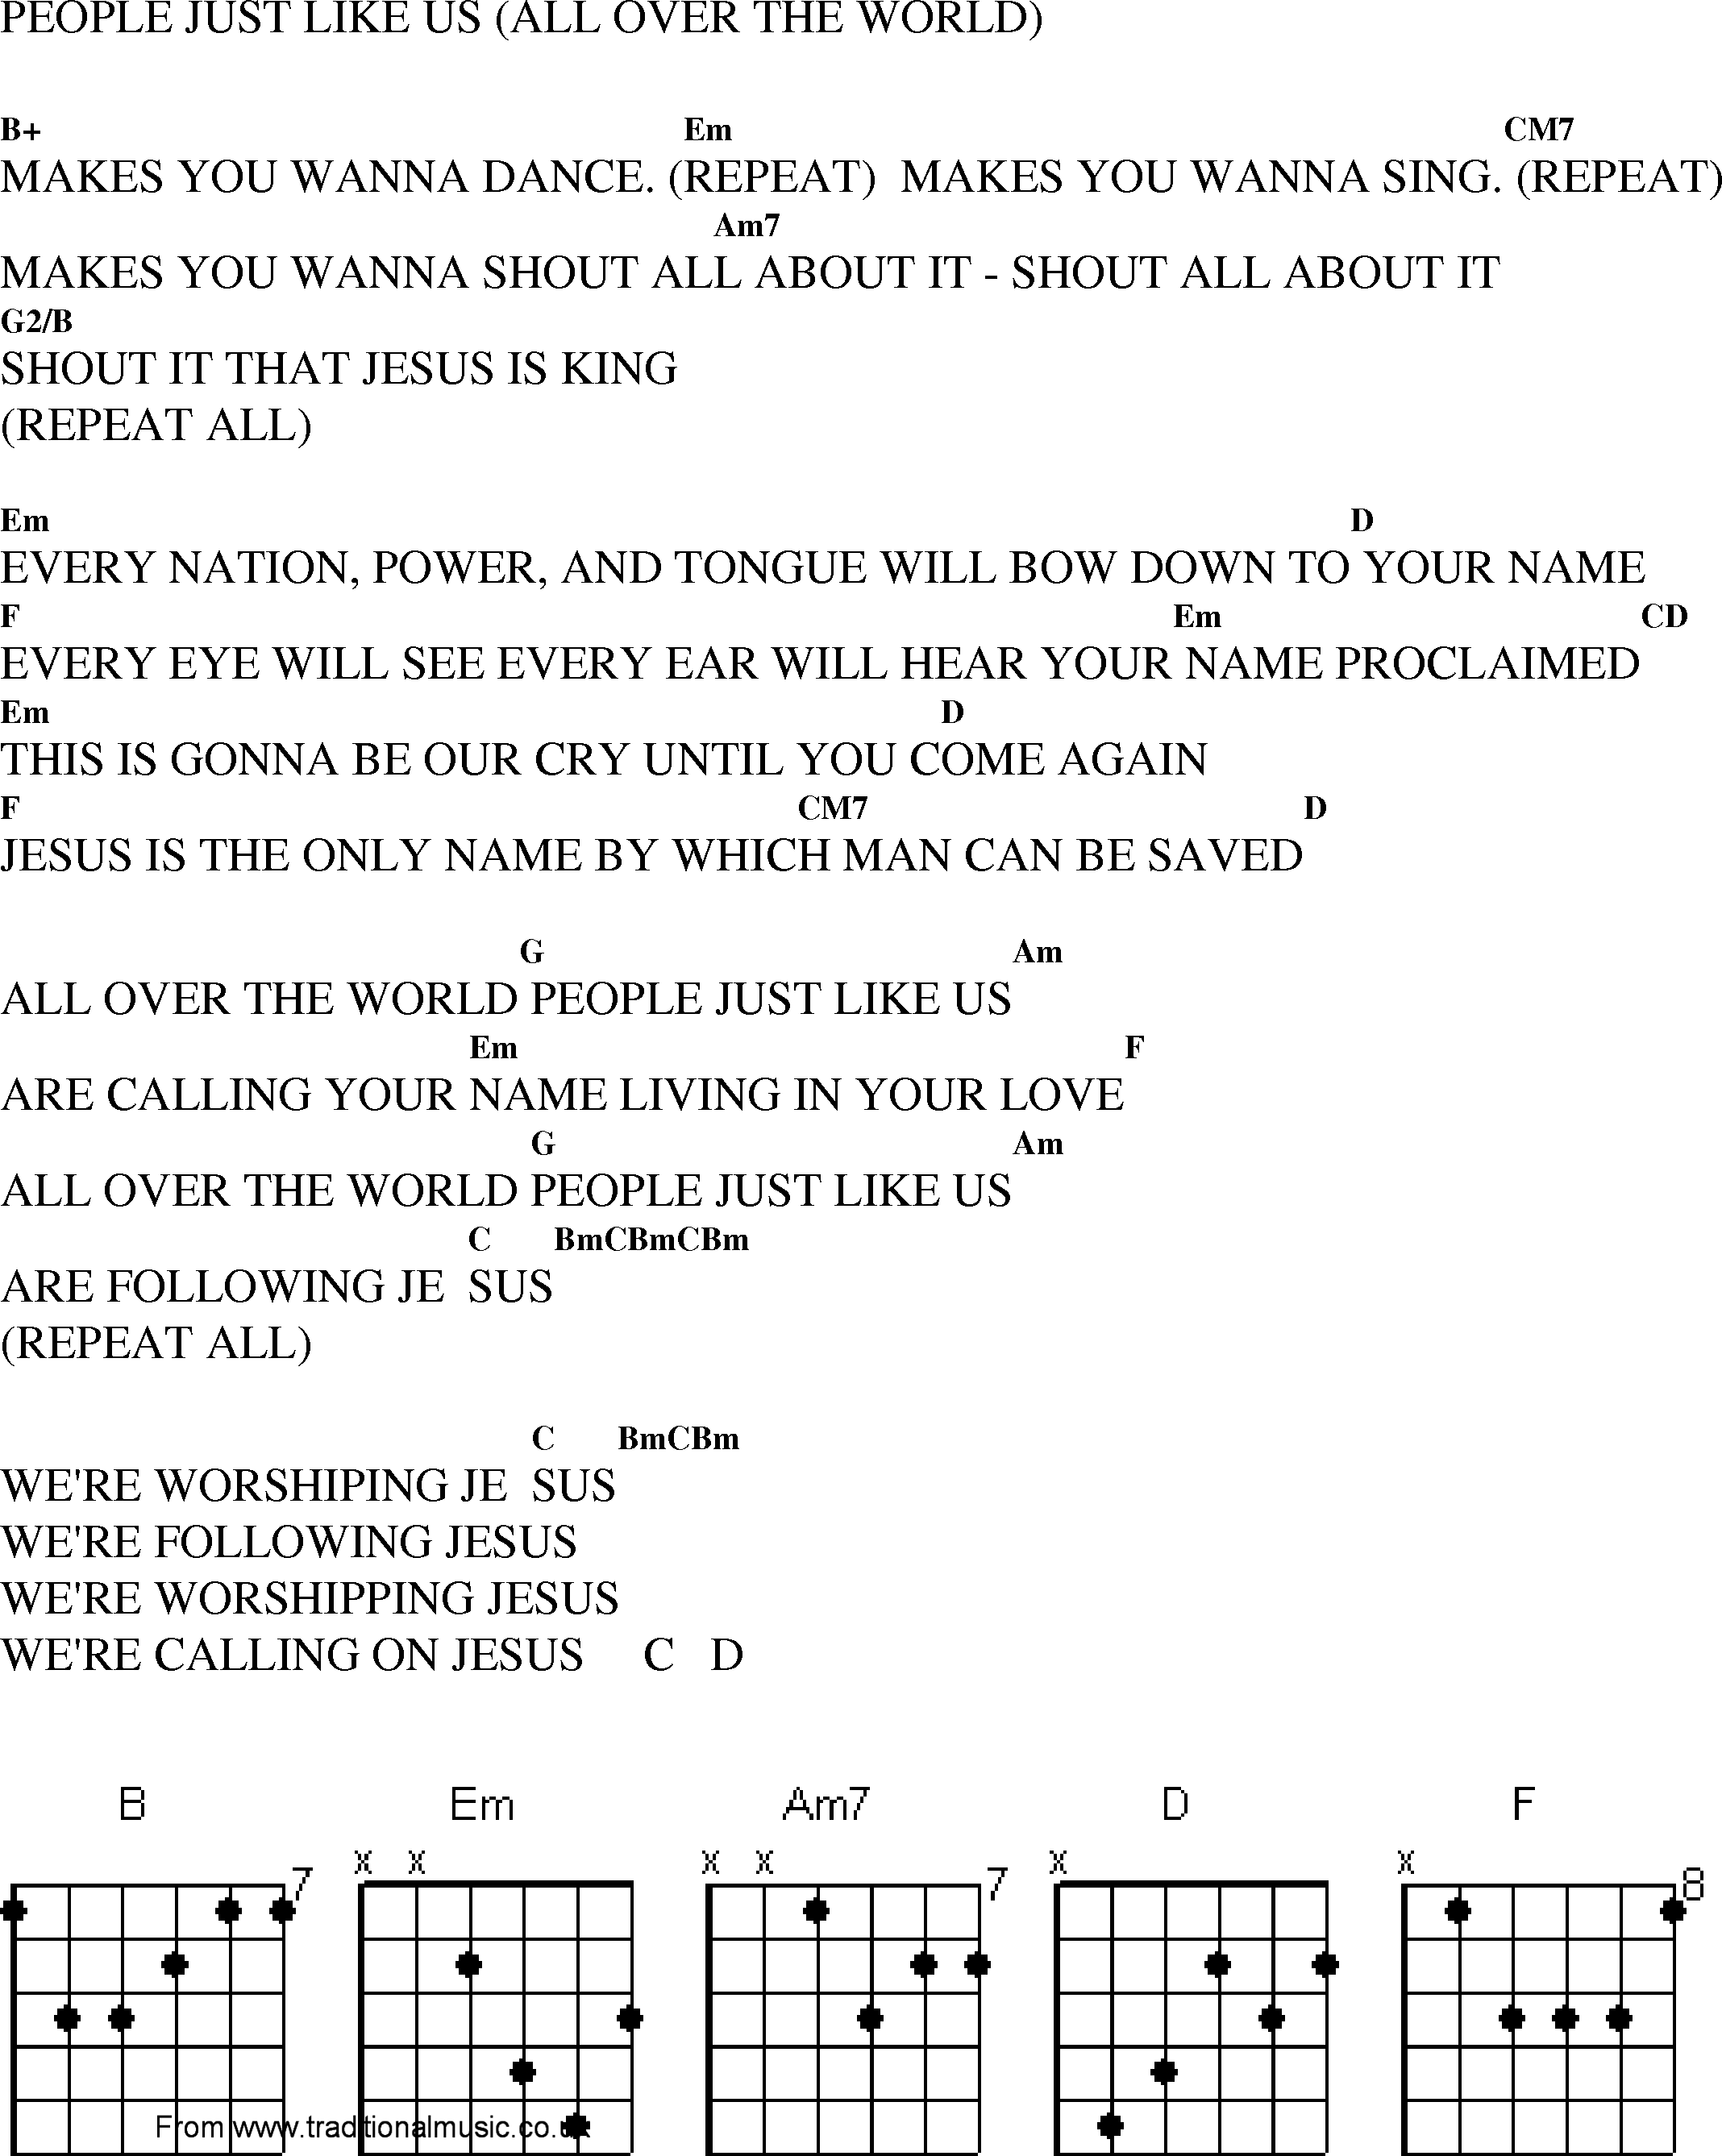 Gospel Song: people_just_like_us, lyrics and chords.